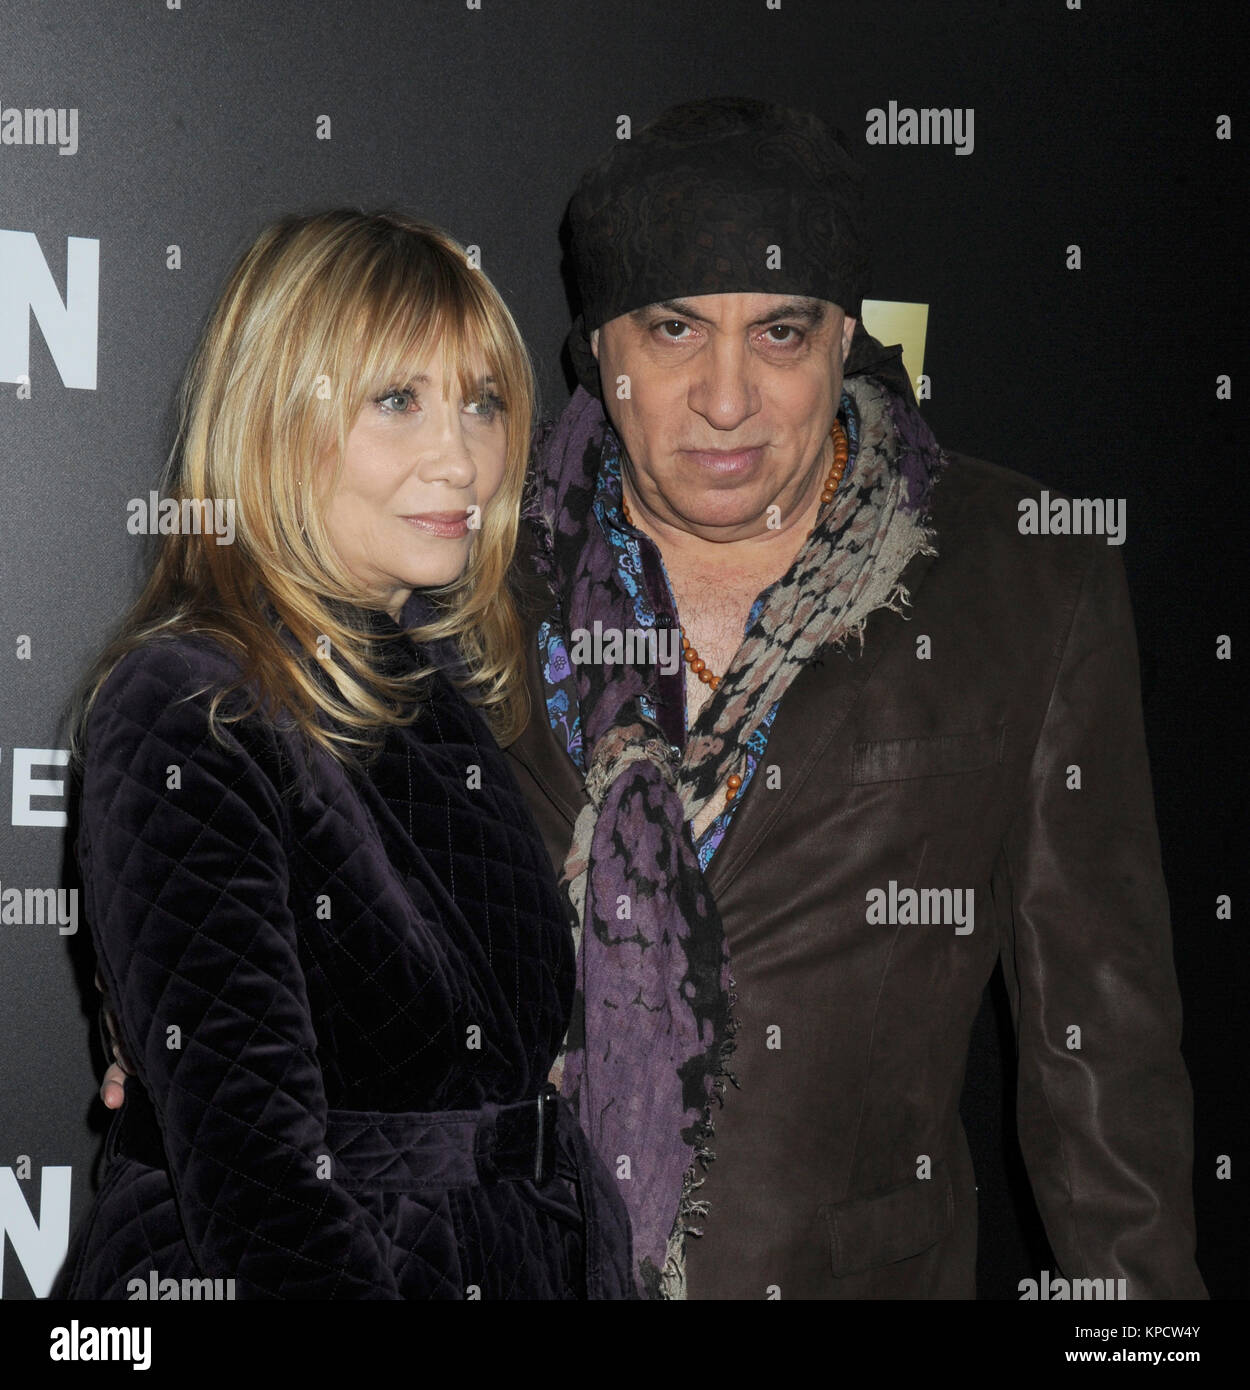 NEW YORK, NY - MARCH 22: Steven Van Zandt, Maureen Van Zandt  attends the 'Mad Men' New York special screening at The Museum of Modern Art on March 22, 2015 in New York City.    People:  Steven Van Zandt, Maureen Van Zandt Stock Photo